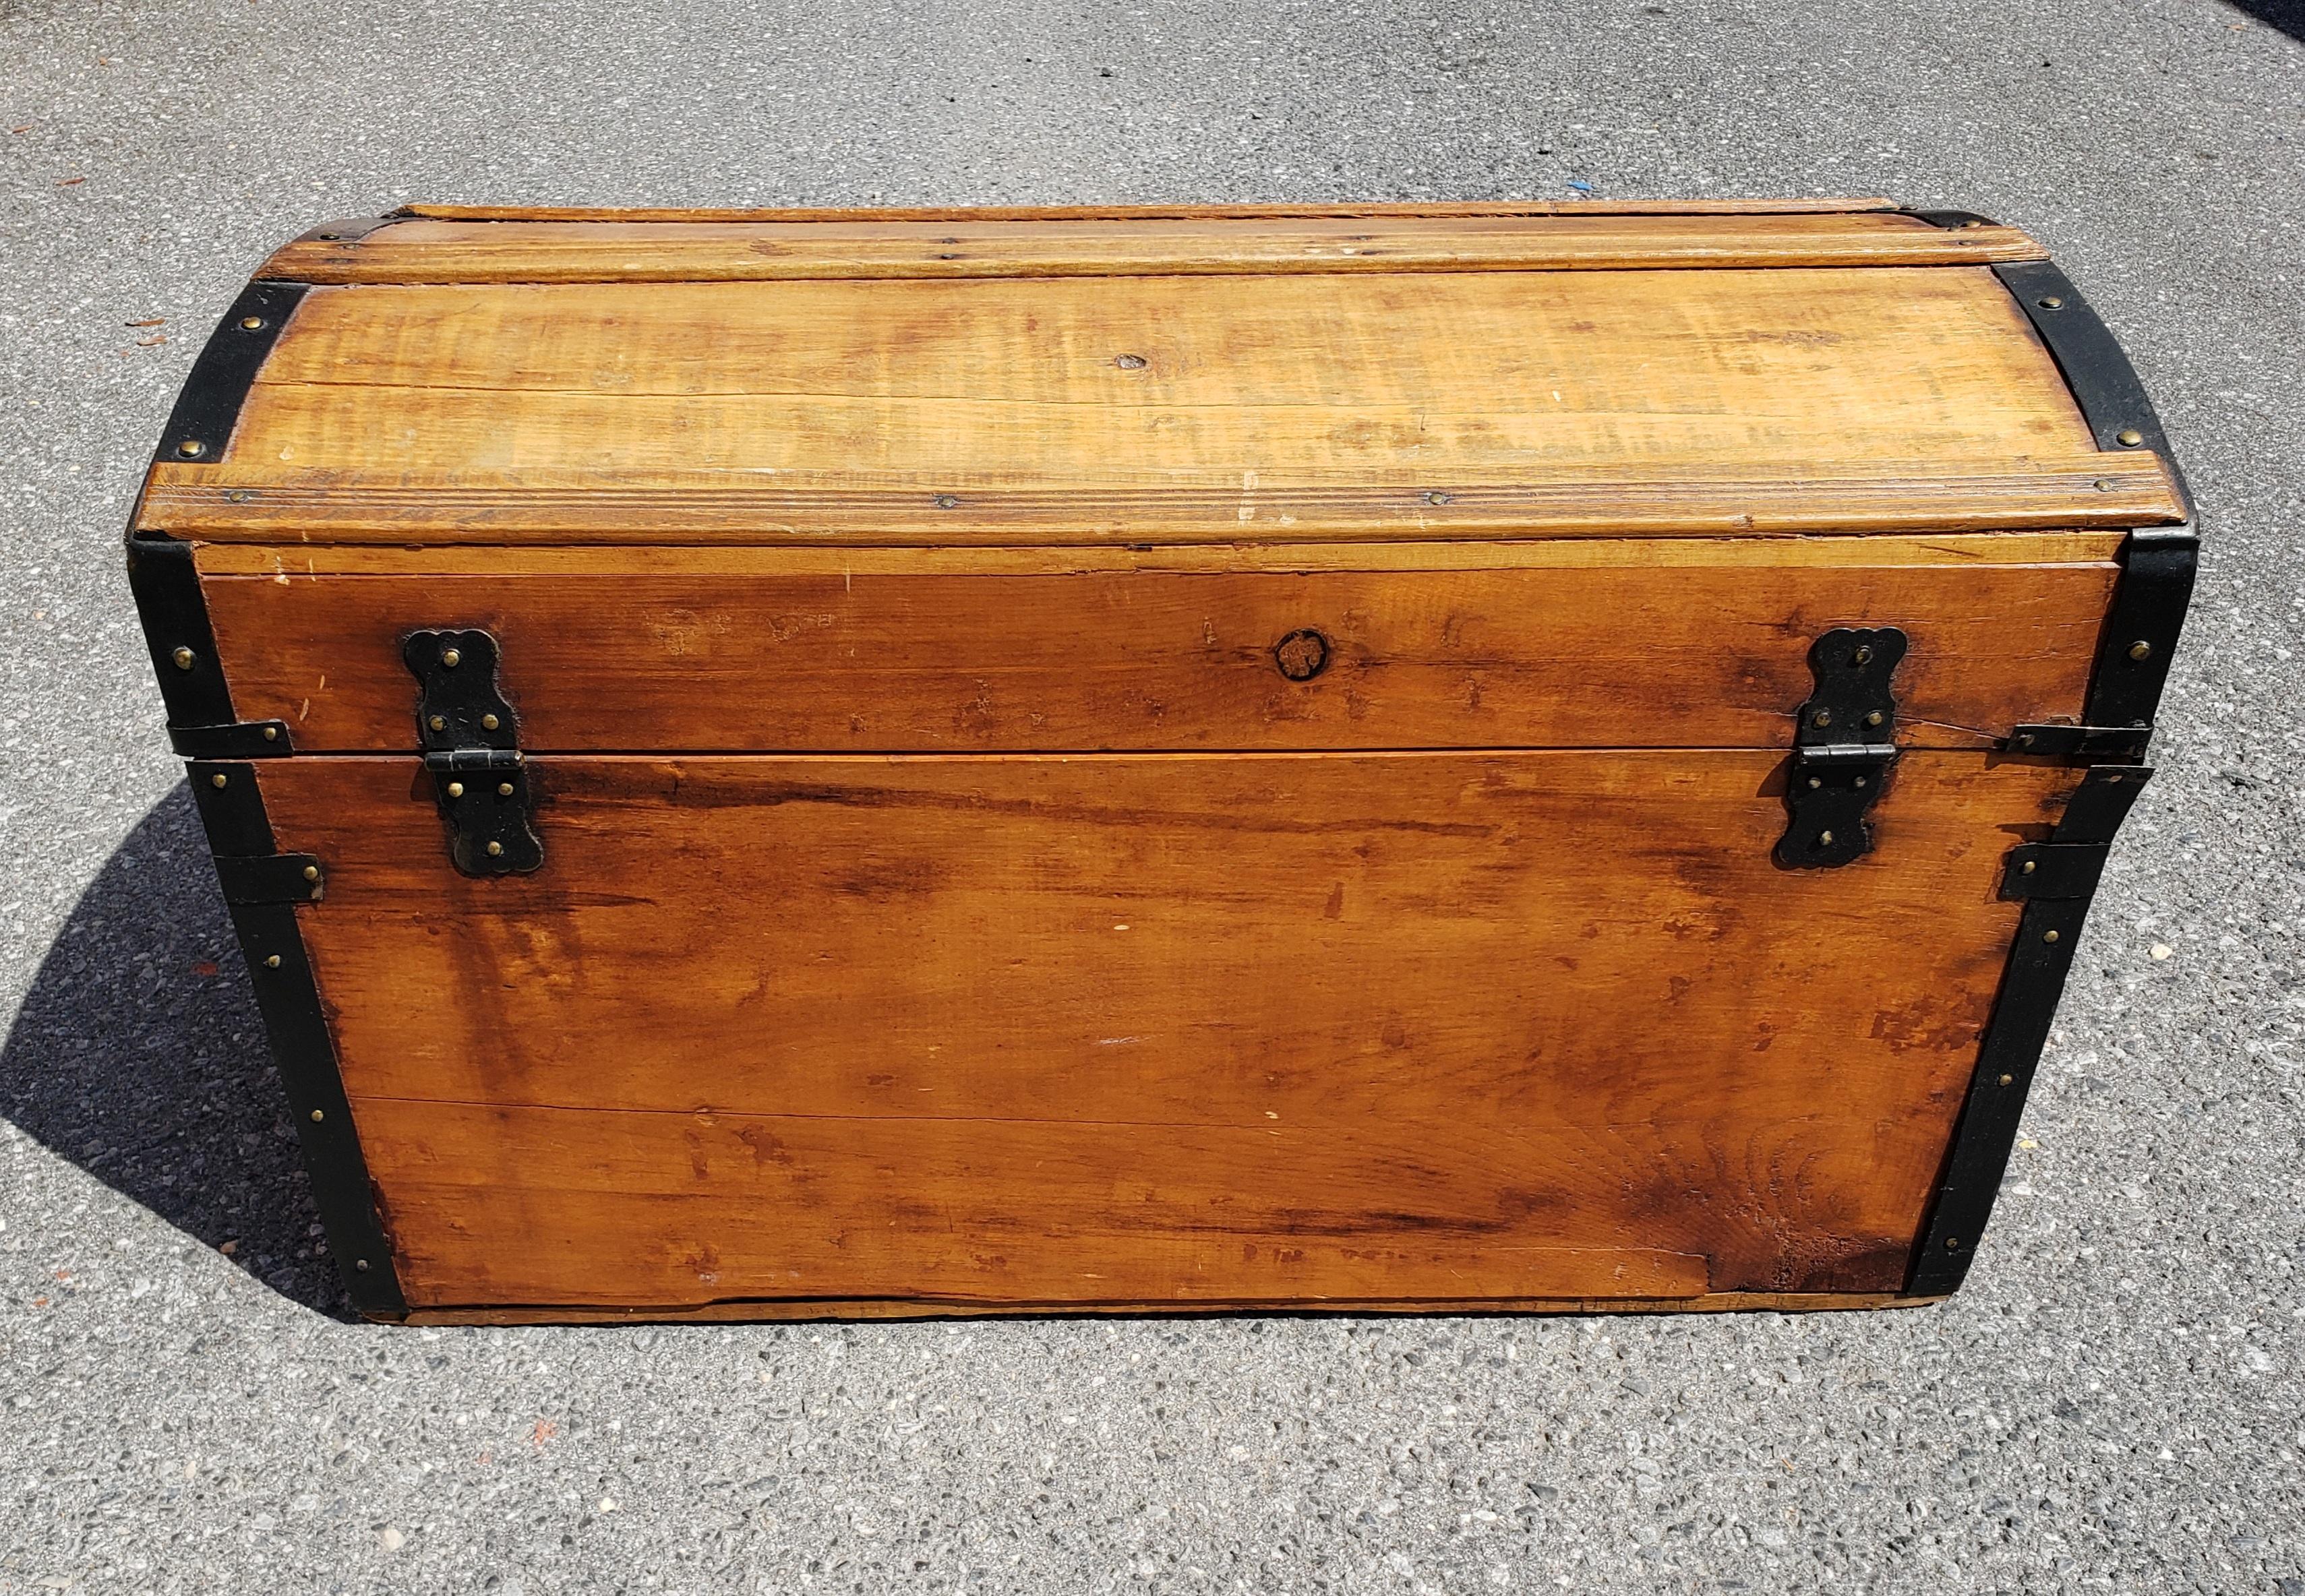 Early American Refinished Pine and Metal Blanket Chest Storage Trunk In Good Condition For Sale In Germantown, MD